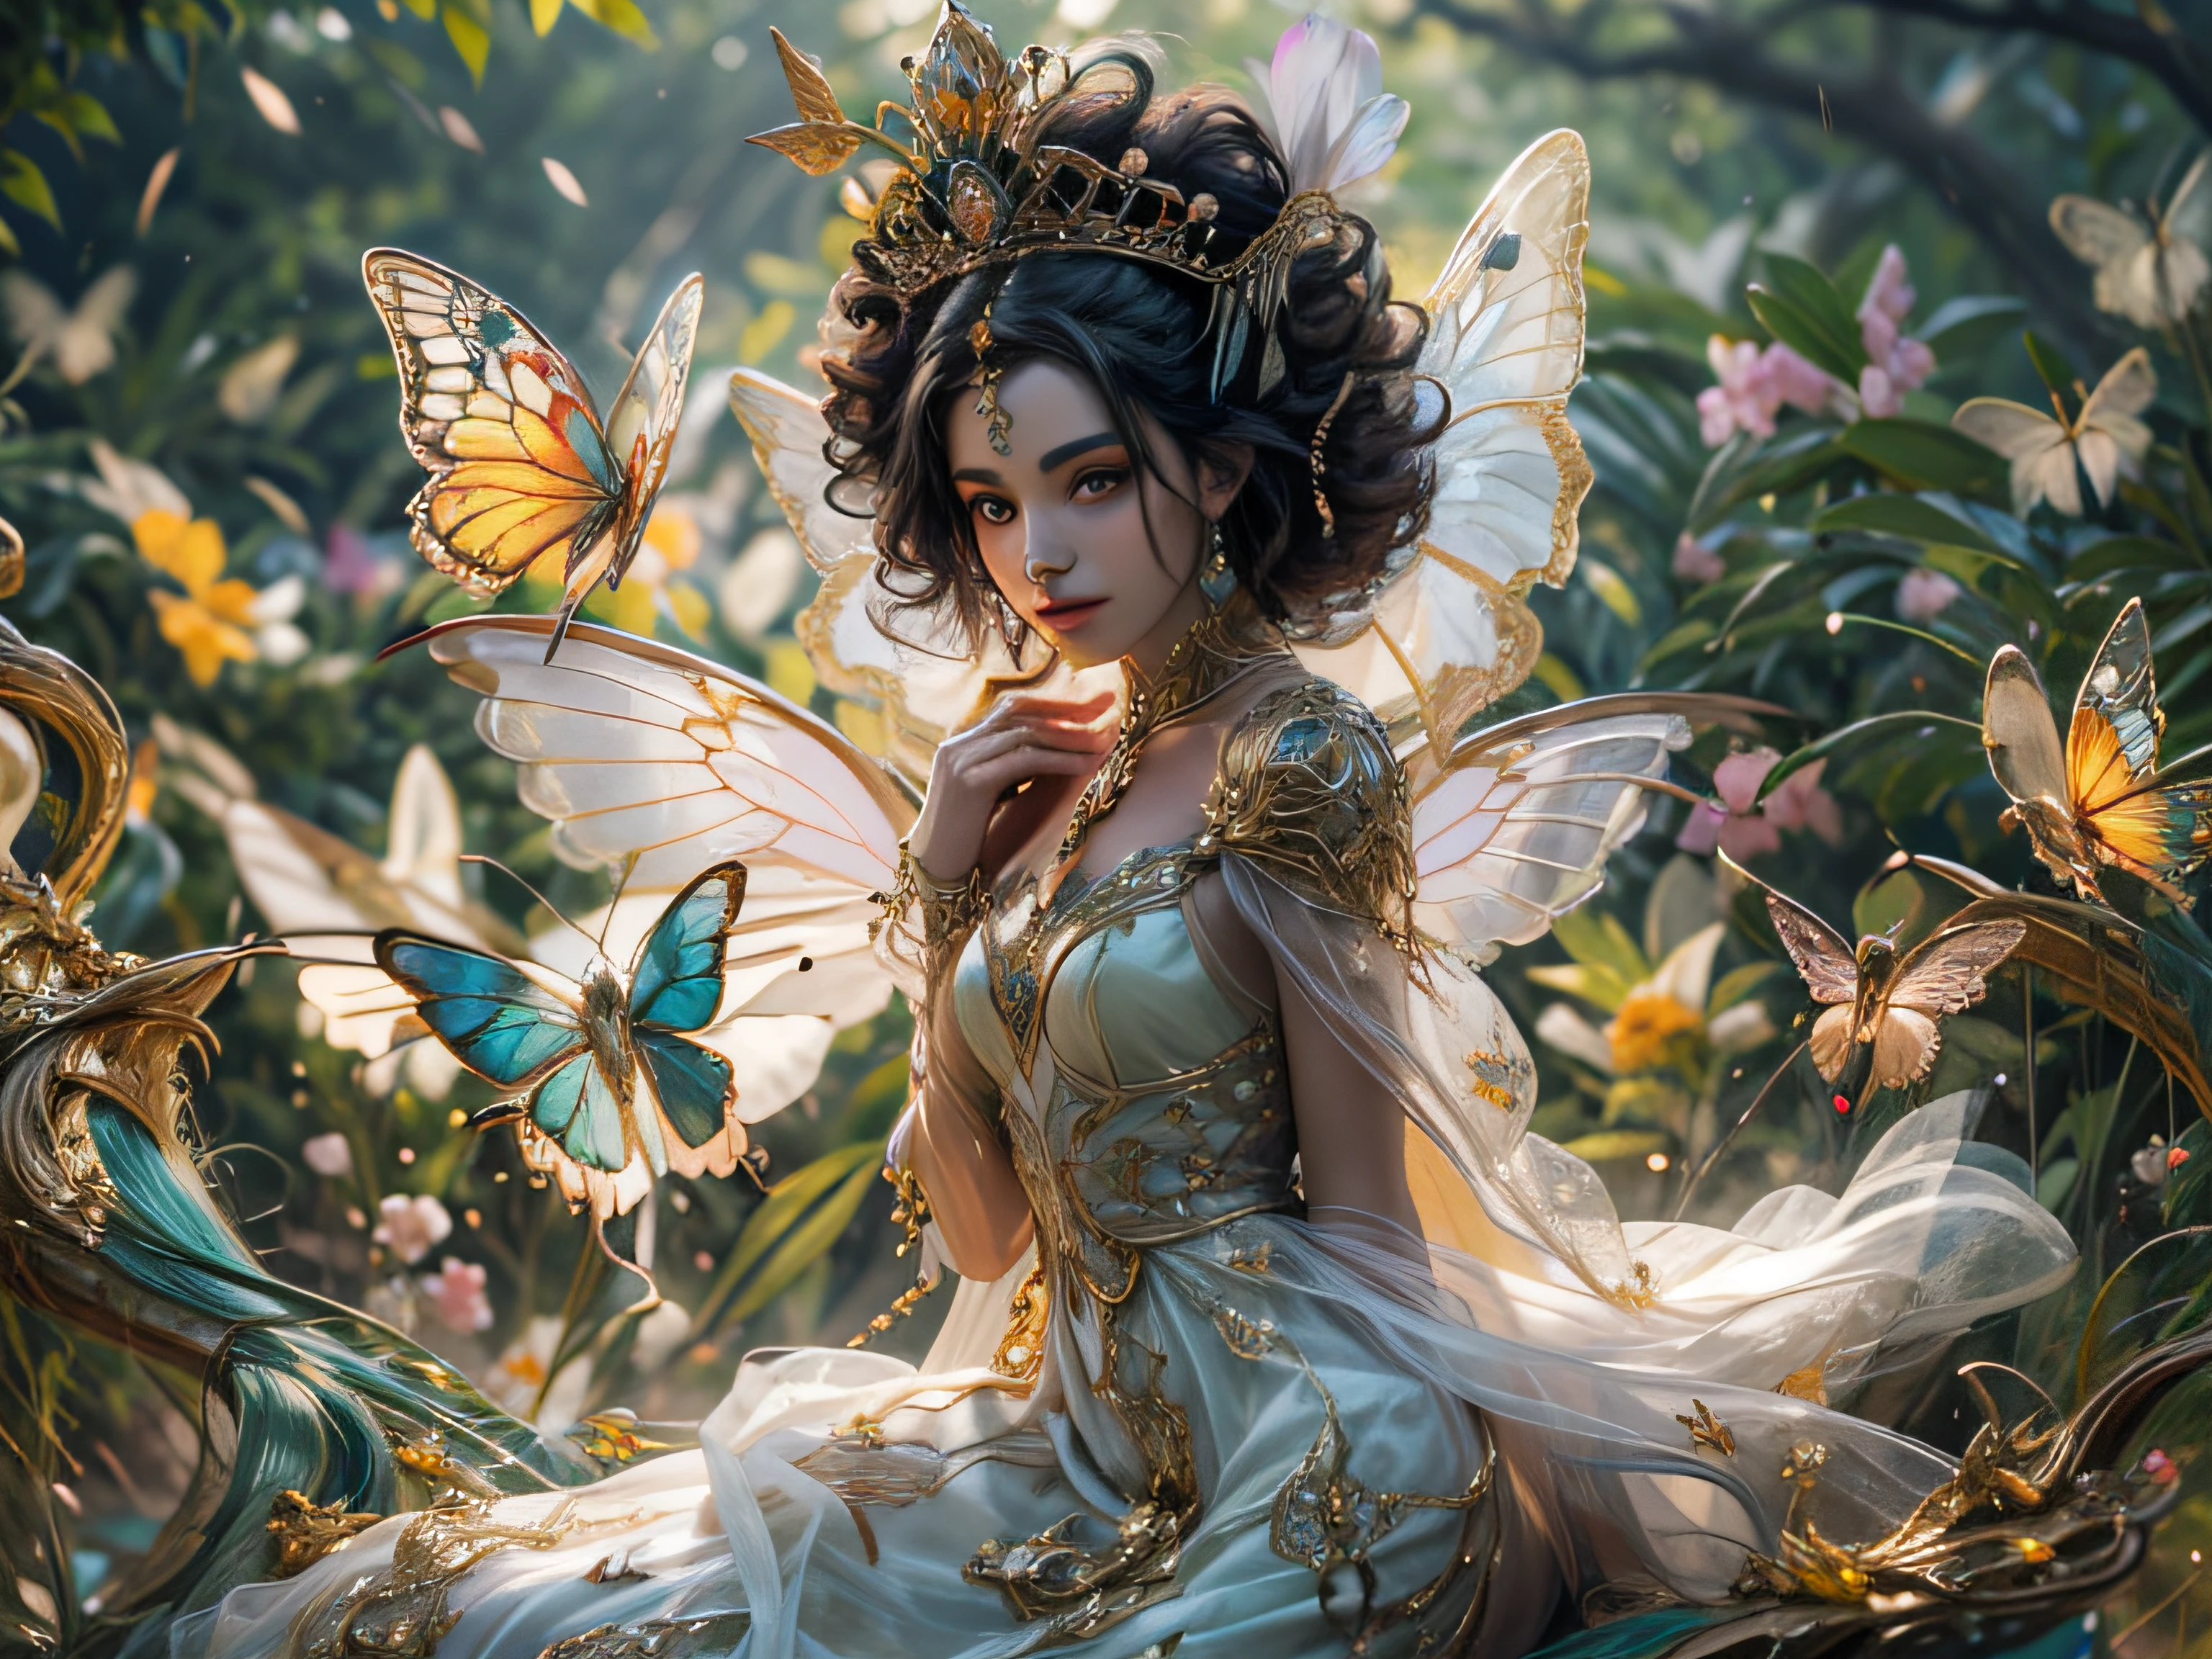 That's、It's a realistic fantasy masterpiece with plenty of sparkles, Glitter, e detalhes ornamentados intrincados. It produces a small woman with a beautiful delicate crown sitting on a garden swing at night. She is a beautiful and seductive butterfly queen with stunning curly black hair, (((Incredibly realistic and detailed dynamic eyes in bright colors with realistic shading))).  her skin is translucent white, Your eyes are shining, and her dress is elegant. Her dress is spun with delicate and fine gossamer silk, Complicado, Detalhes florais delicados e mangas de borboleta de seda dourada. His face is beautiful and . Inclua flores que brilham no escuro, many particles, Fantasy: highly realistic butt fly with translucent wings, yolk color and fine details, E brilhe. Arte feita no estilo de Guviz、Artstation and Midjourney fantasy titles in vogue、Reminds the masters of this genre. Camera: Using dynamic composition techniques、Emphasizes ethereal delicacy and delicate details.